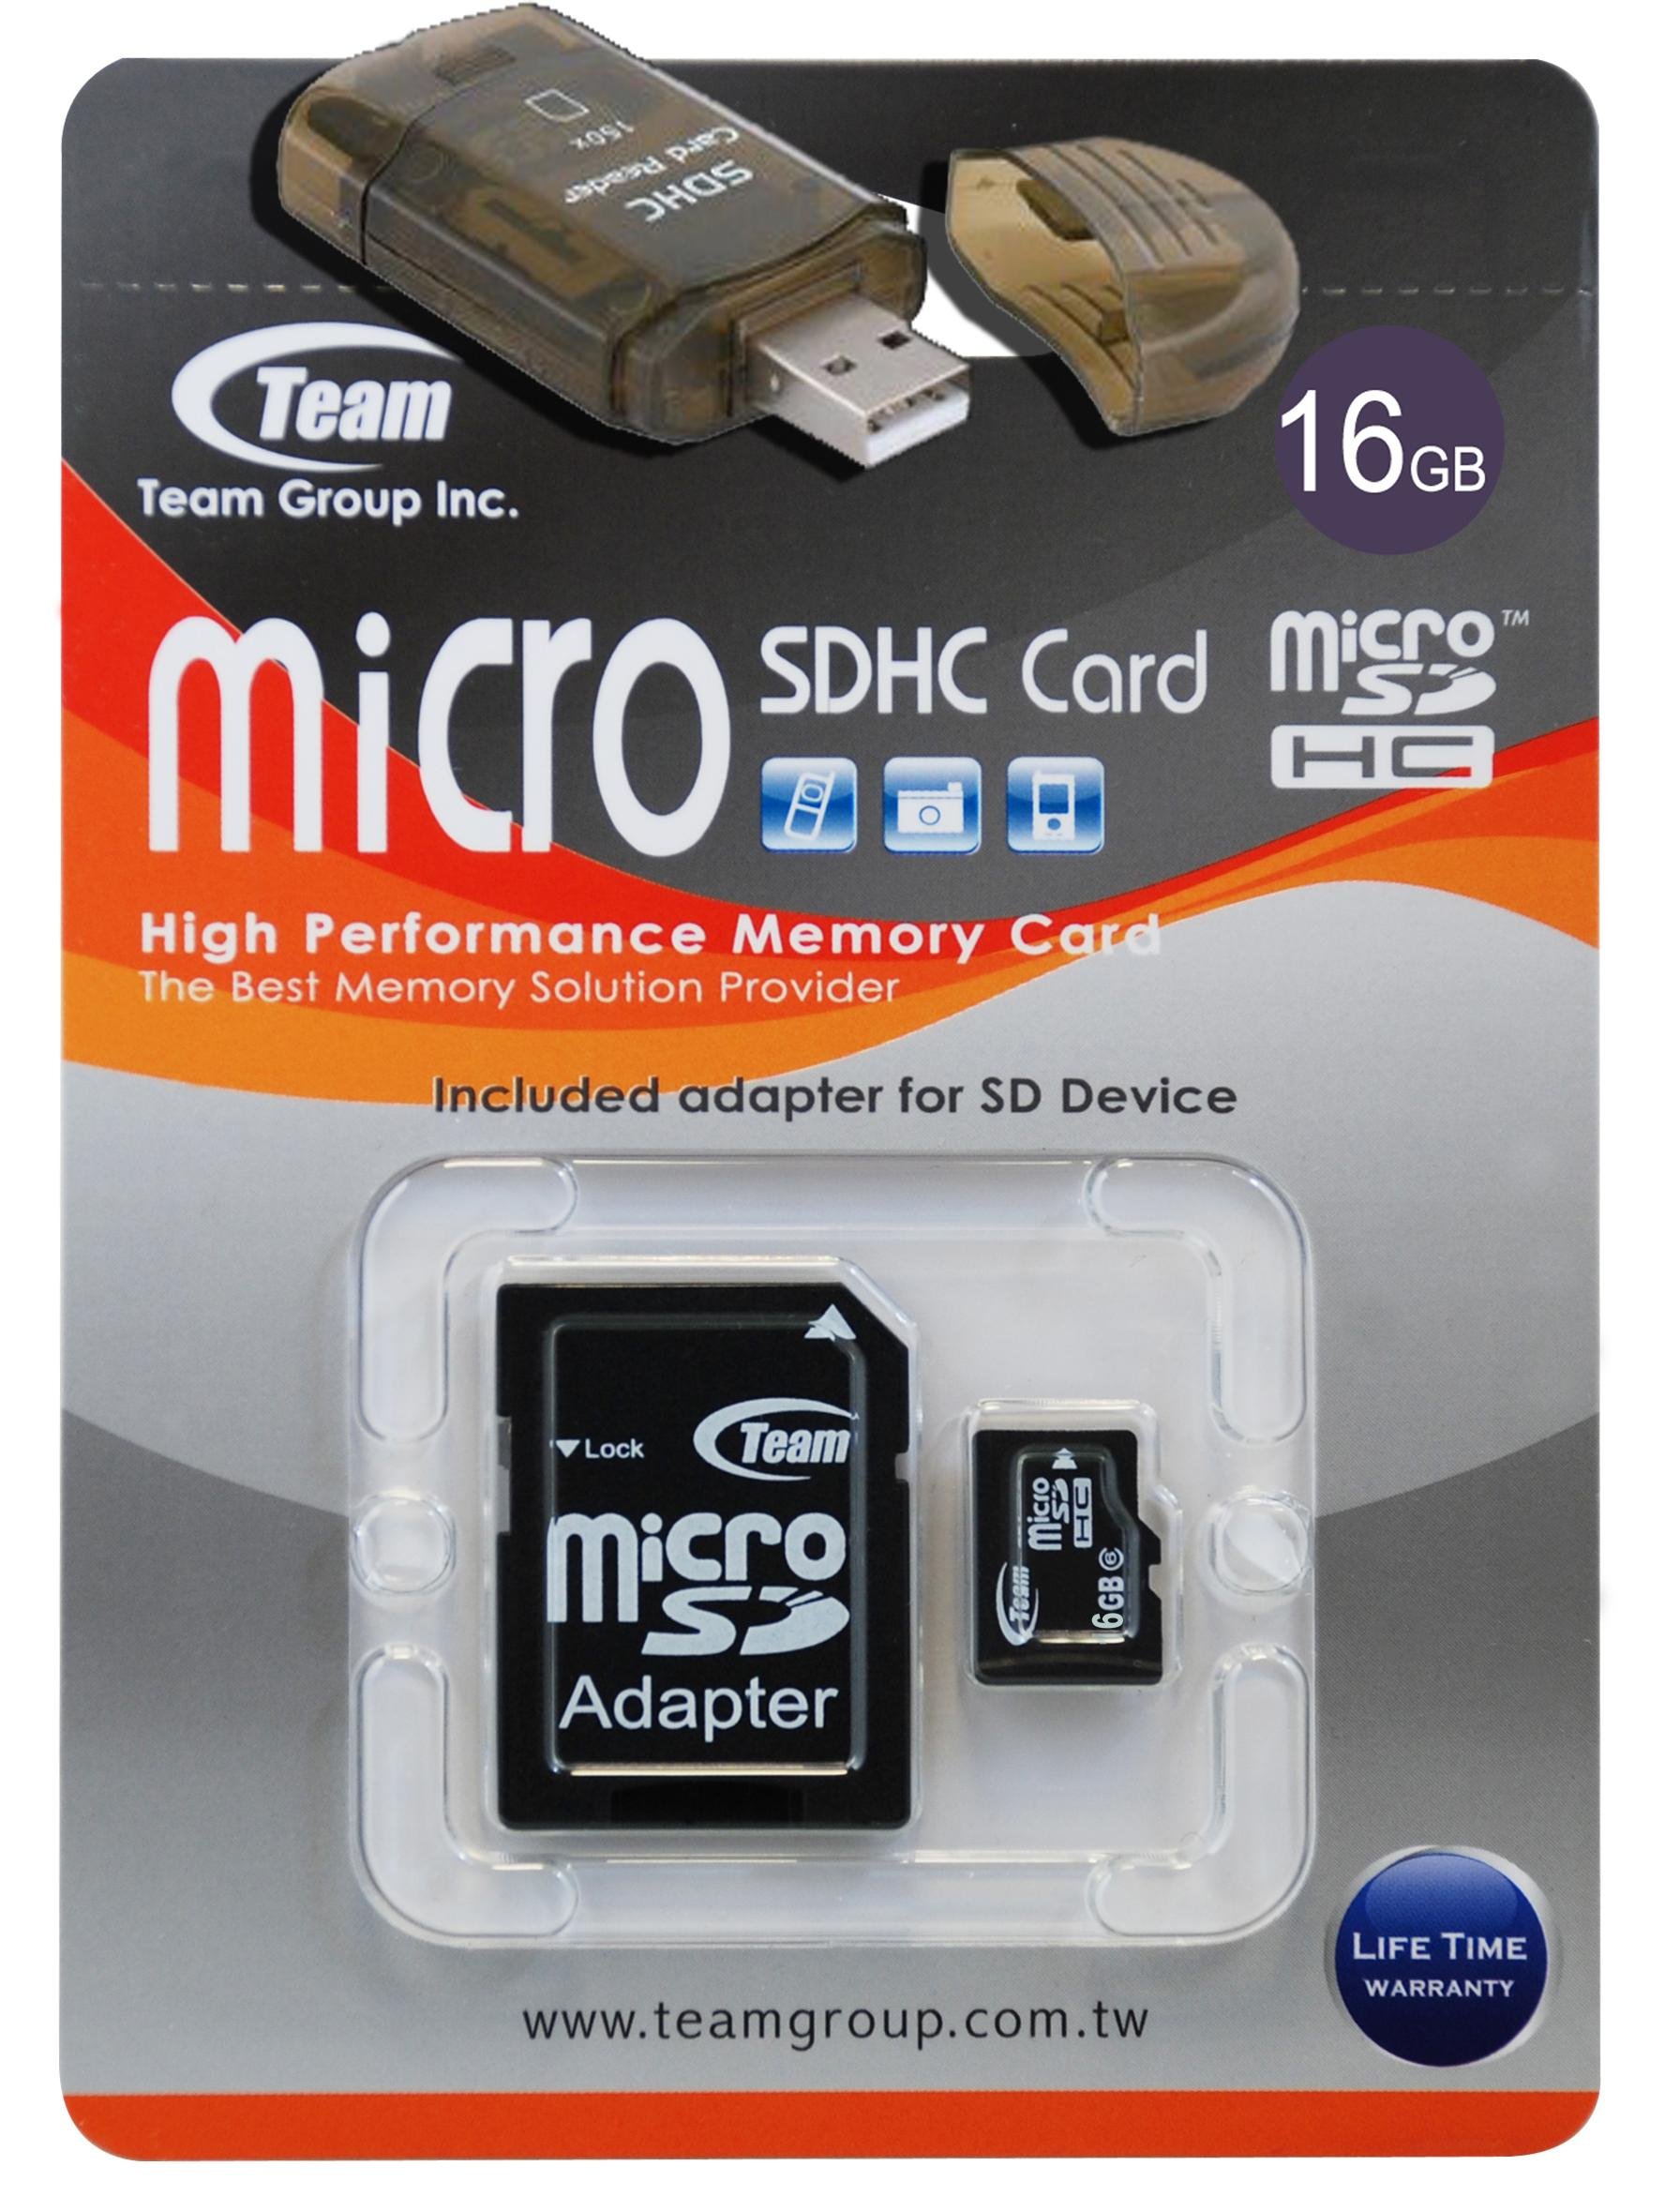 16GB Turbo Speed Class 6 MicroSDHC Memory Card For LG VX10000 VX11000 VX8360. High Speed Card Comes with a free SD and USB Ad